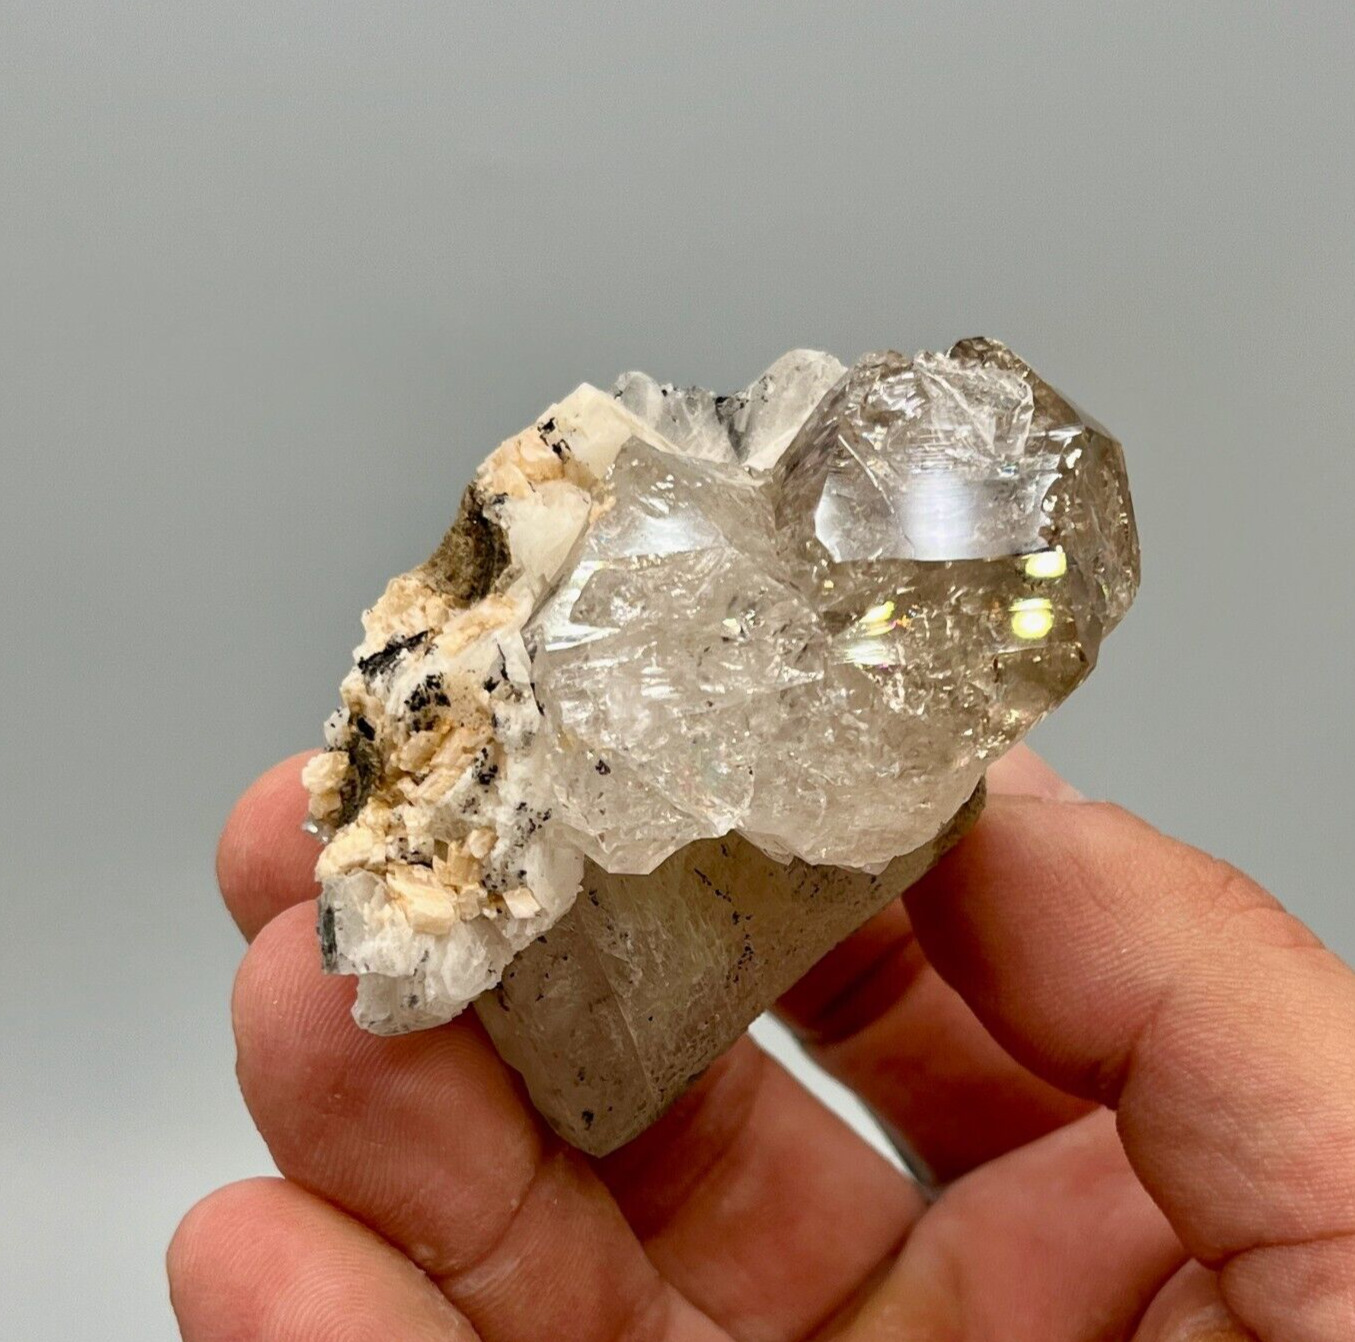 107g Skeletal Herkimer Diamond and Calcite Crystal, Gorgeous Rainbow, 6 Crystals